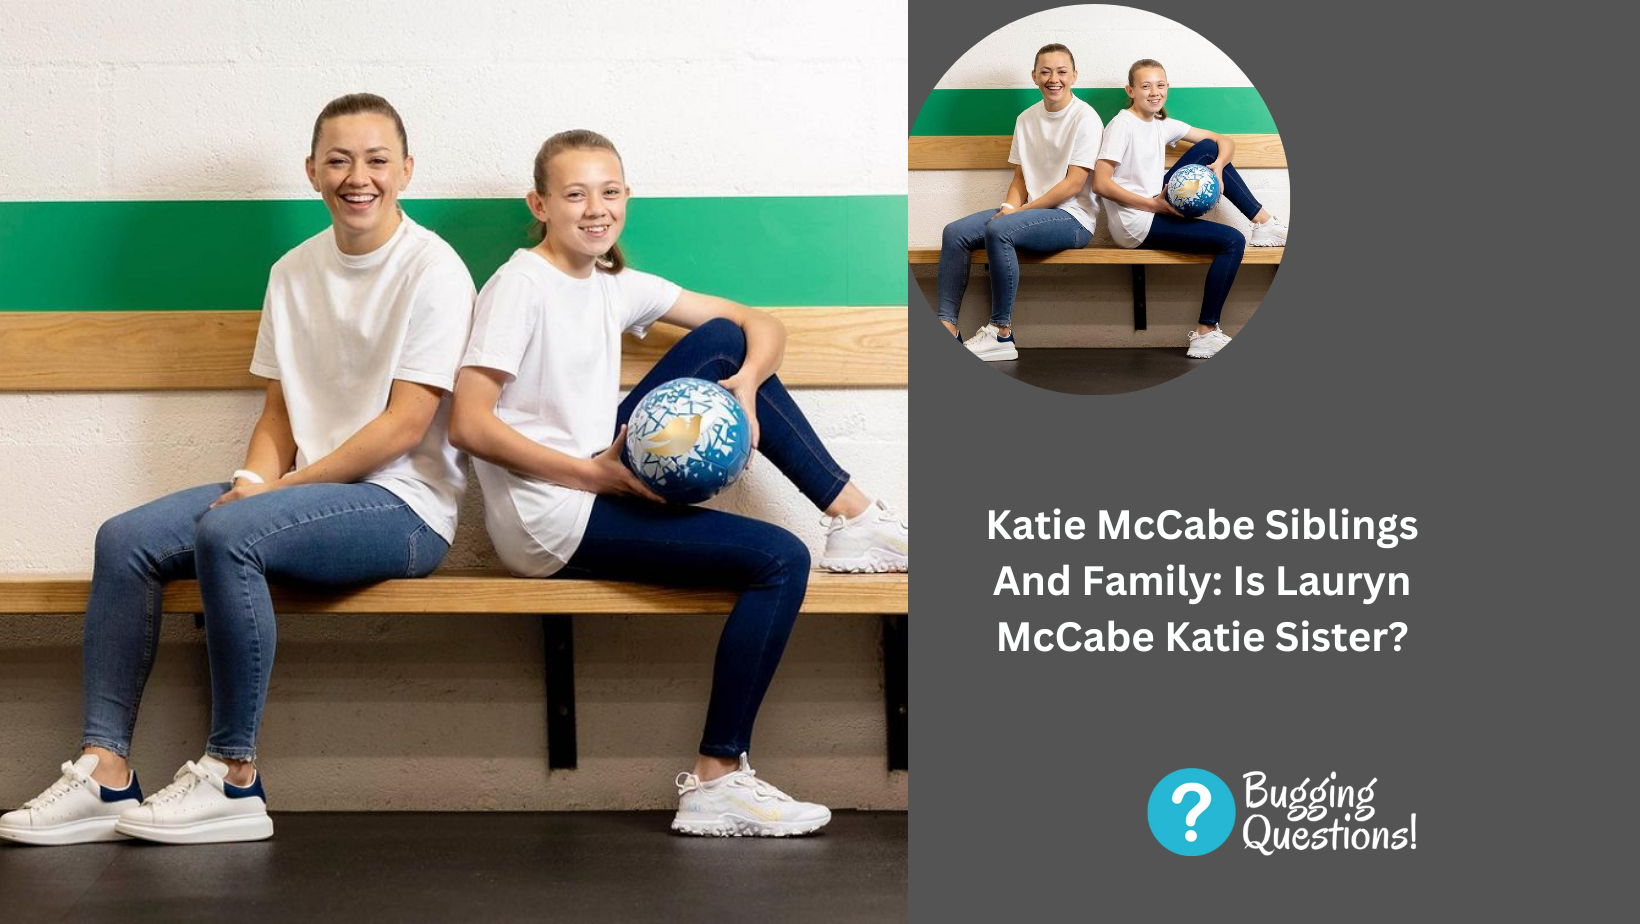 Katie McCabe Siblings And Family: Is Lauryn McCabe Katie Sister?